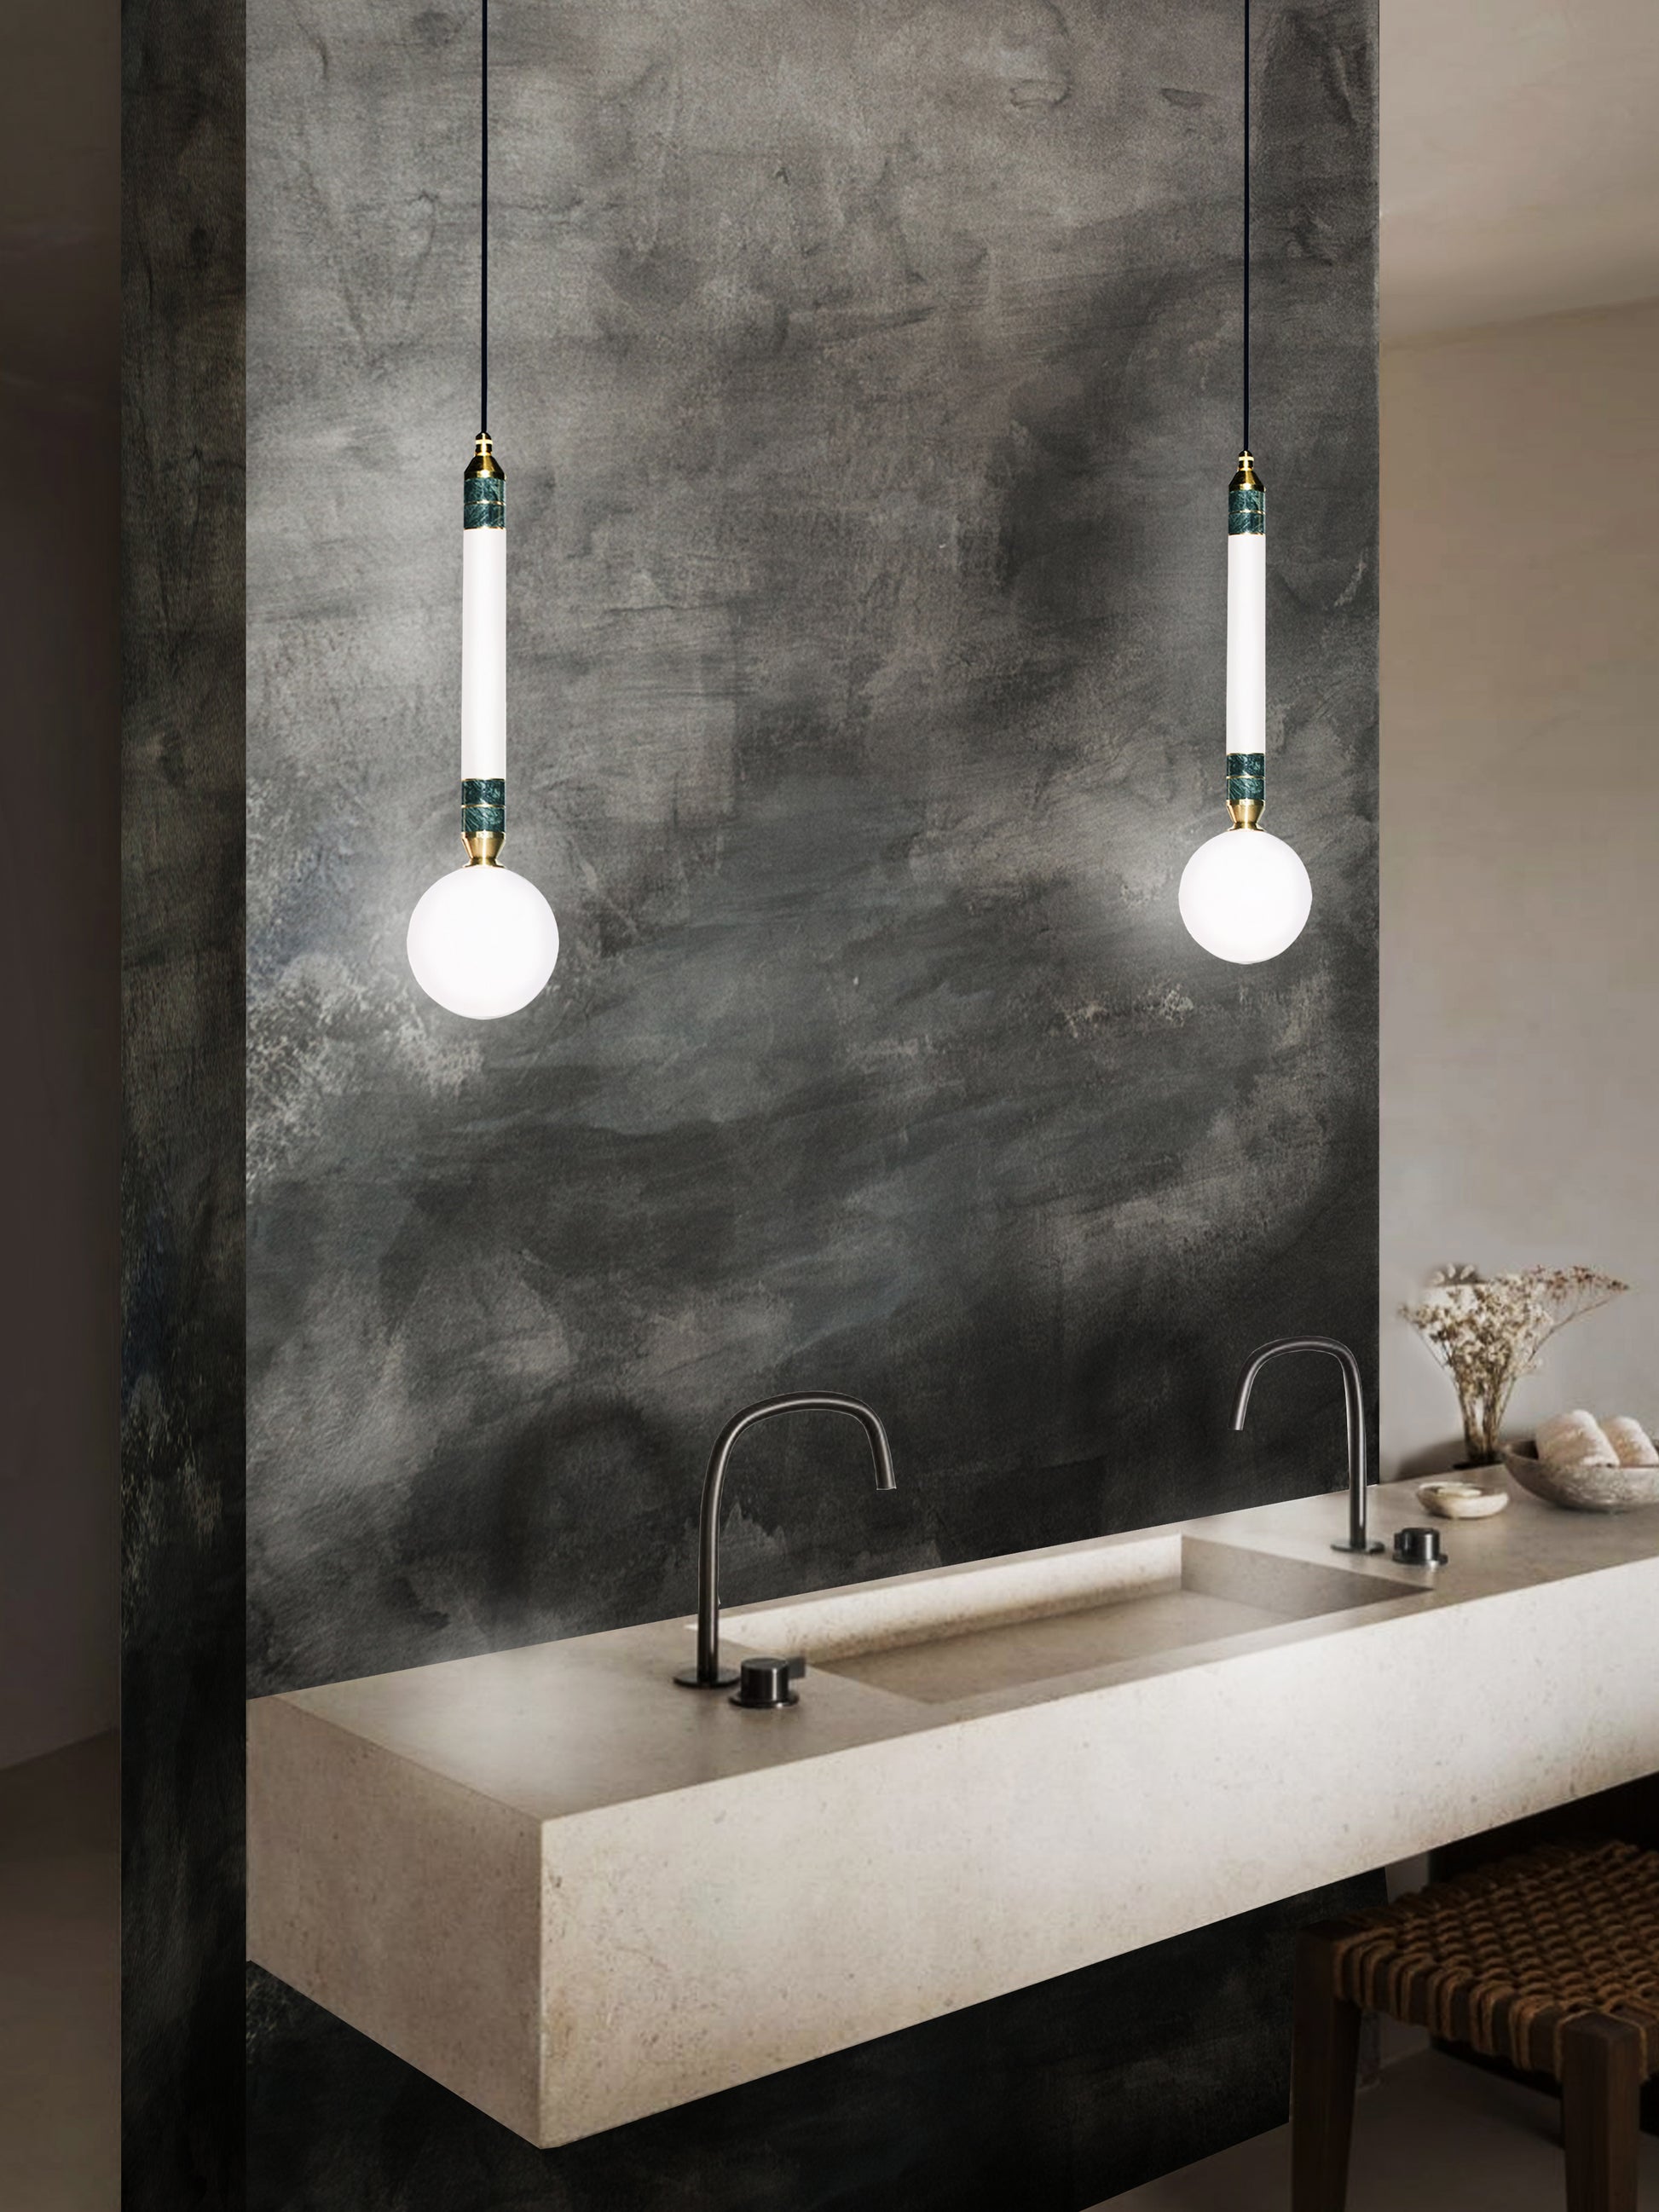 Greenstone Small Pendant Light, hanging from ceiling above sink in setting.